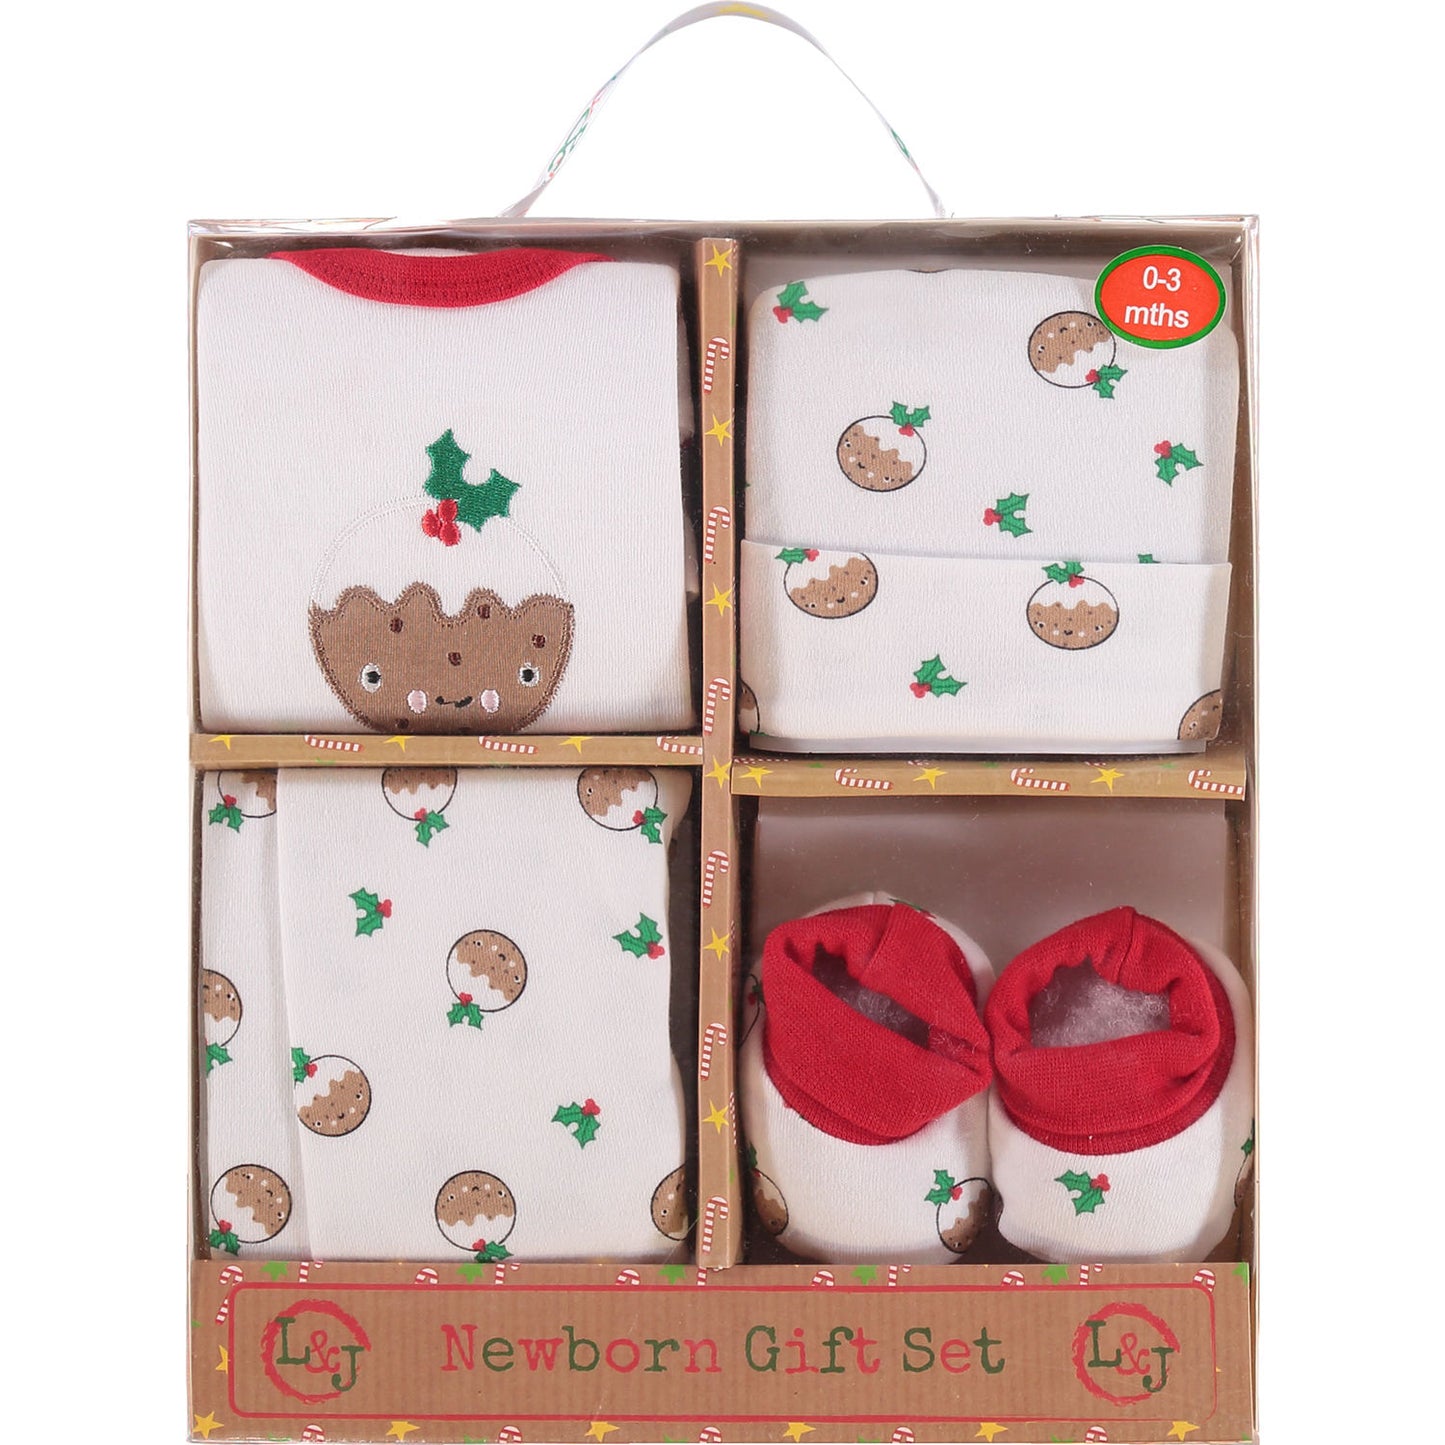 Little Pudding Christmas Gift set 0-3 months